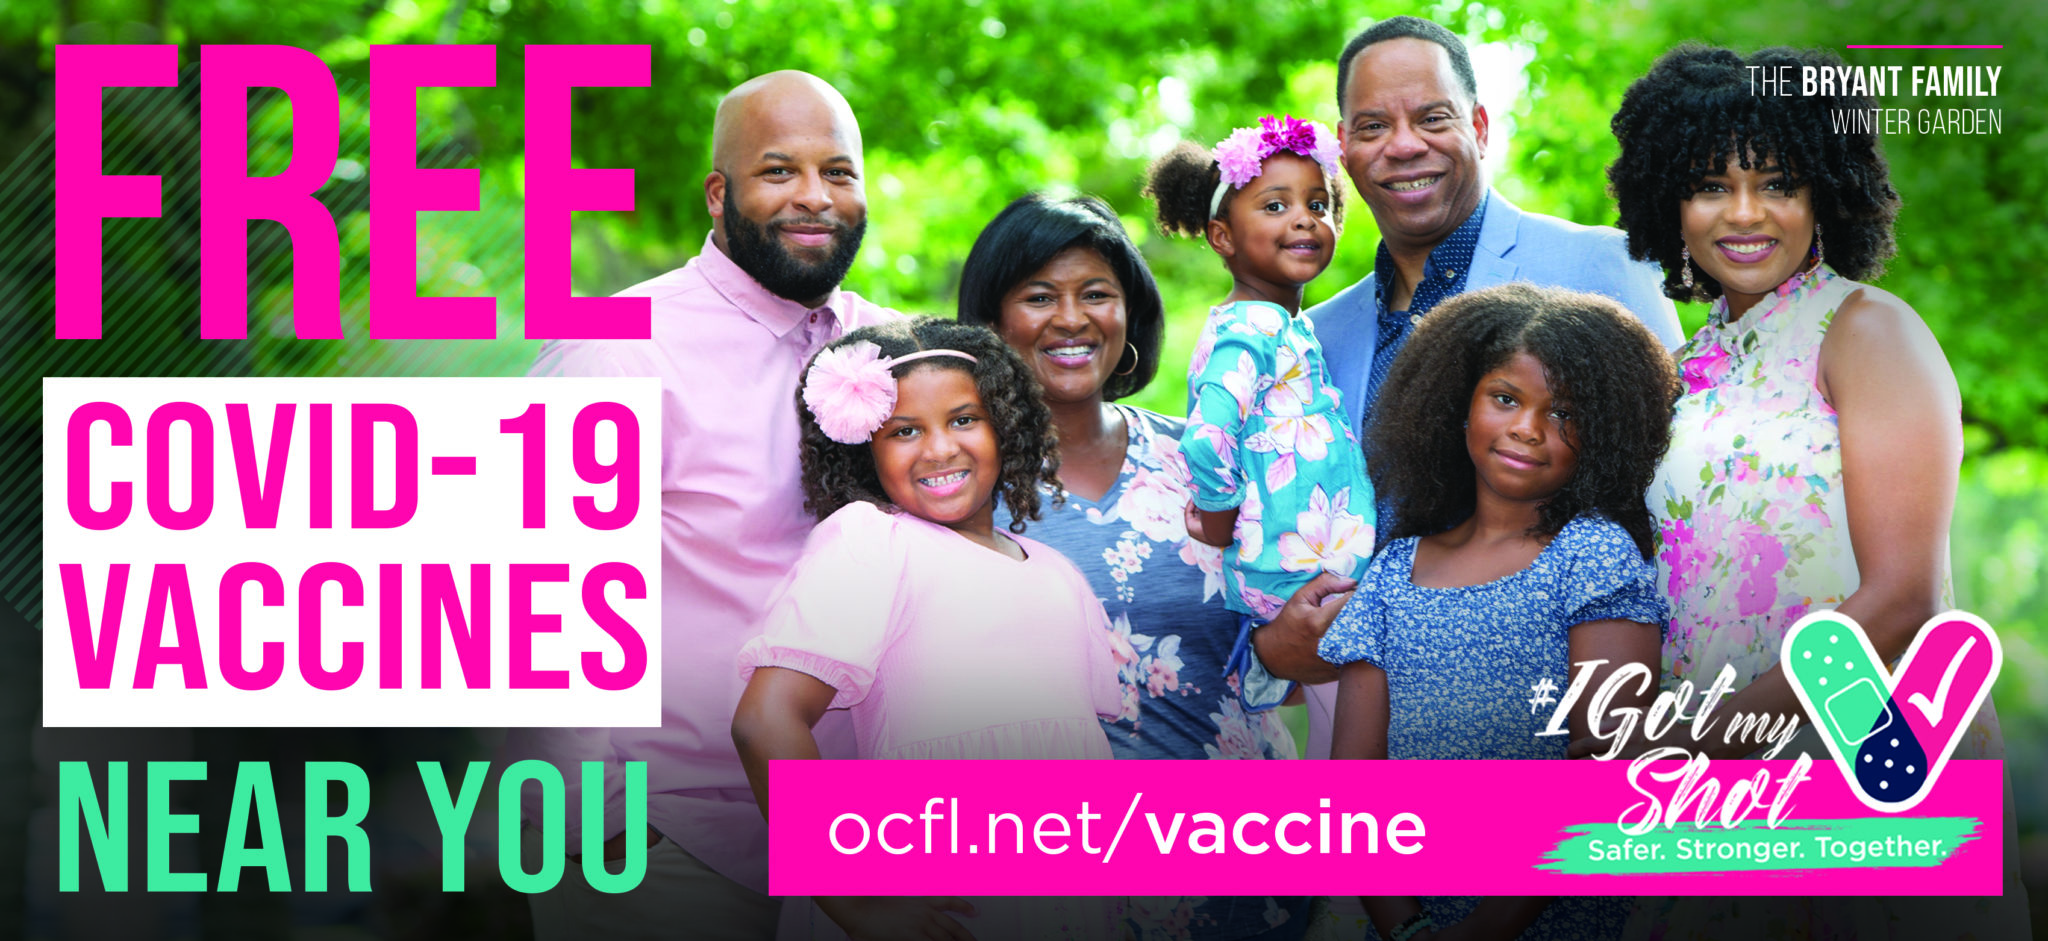 Orange County Government Launches Targeted Billboard Campaign to Increase COVID-19 Vaccination Rates